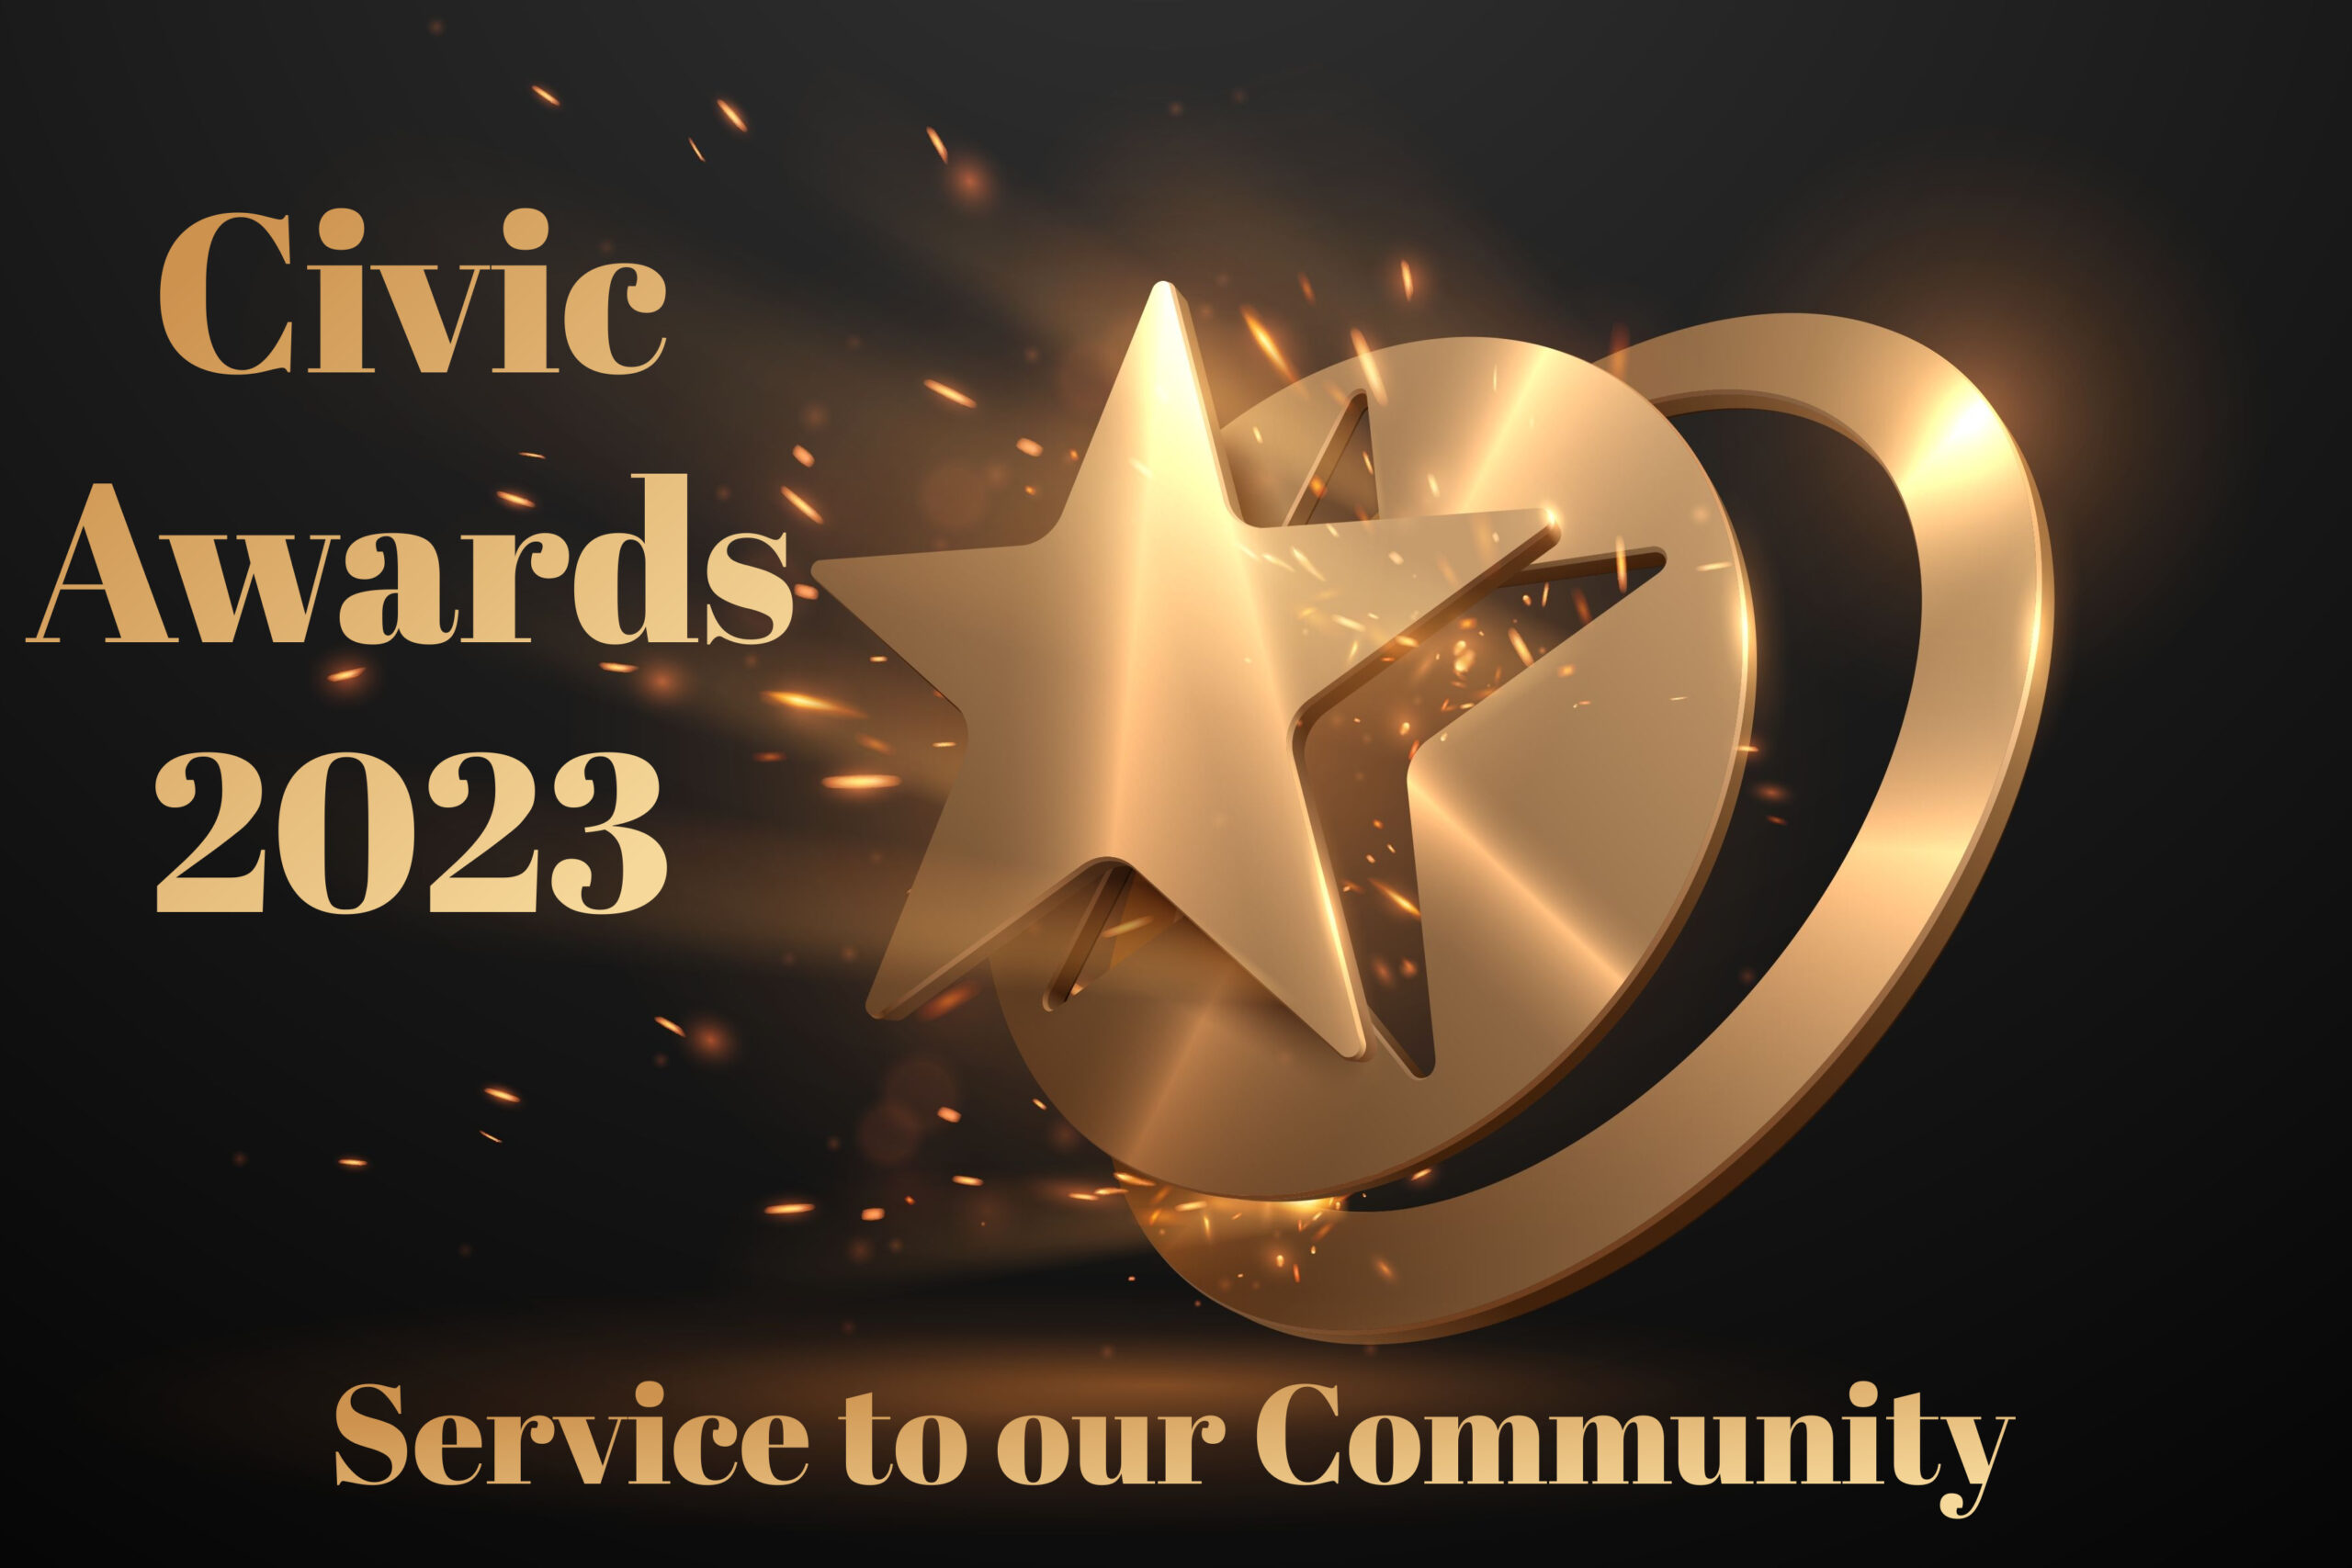 Civic Awards 2023: Service to our Community